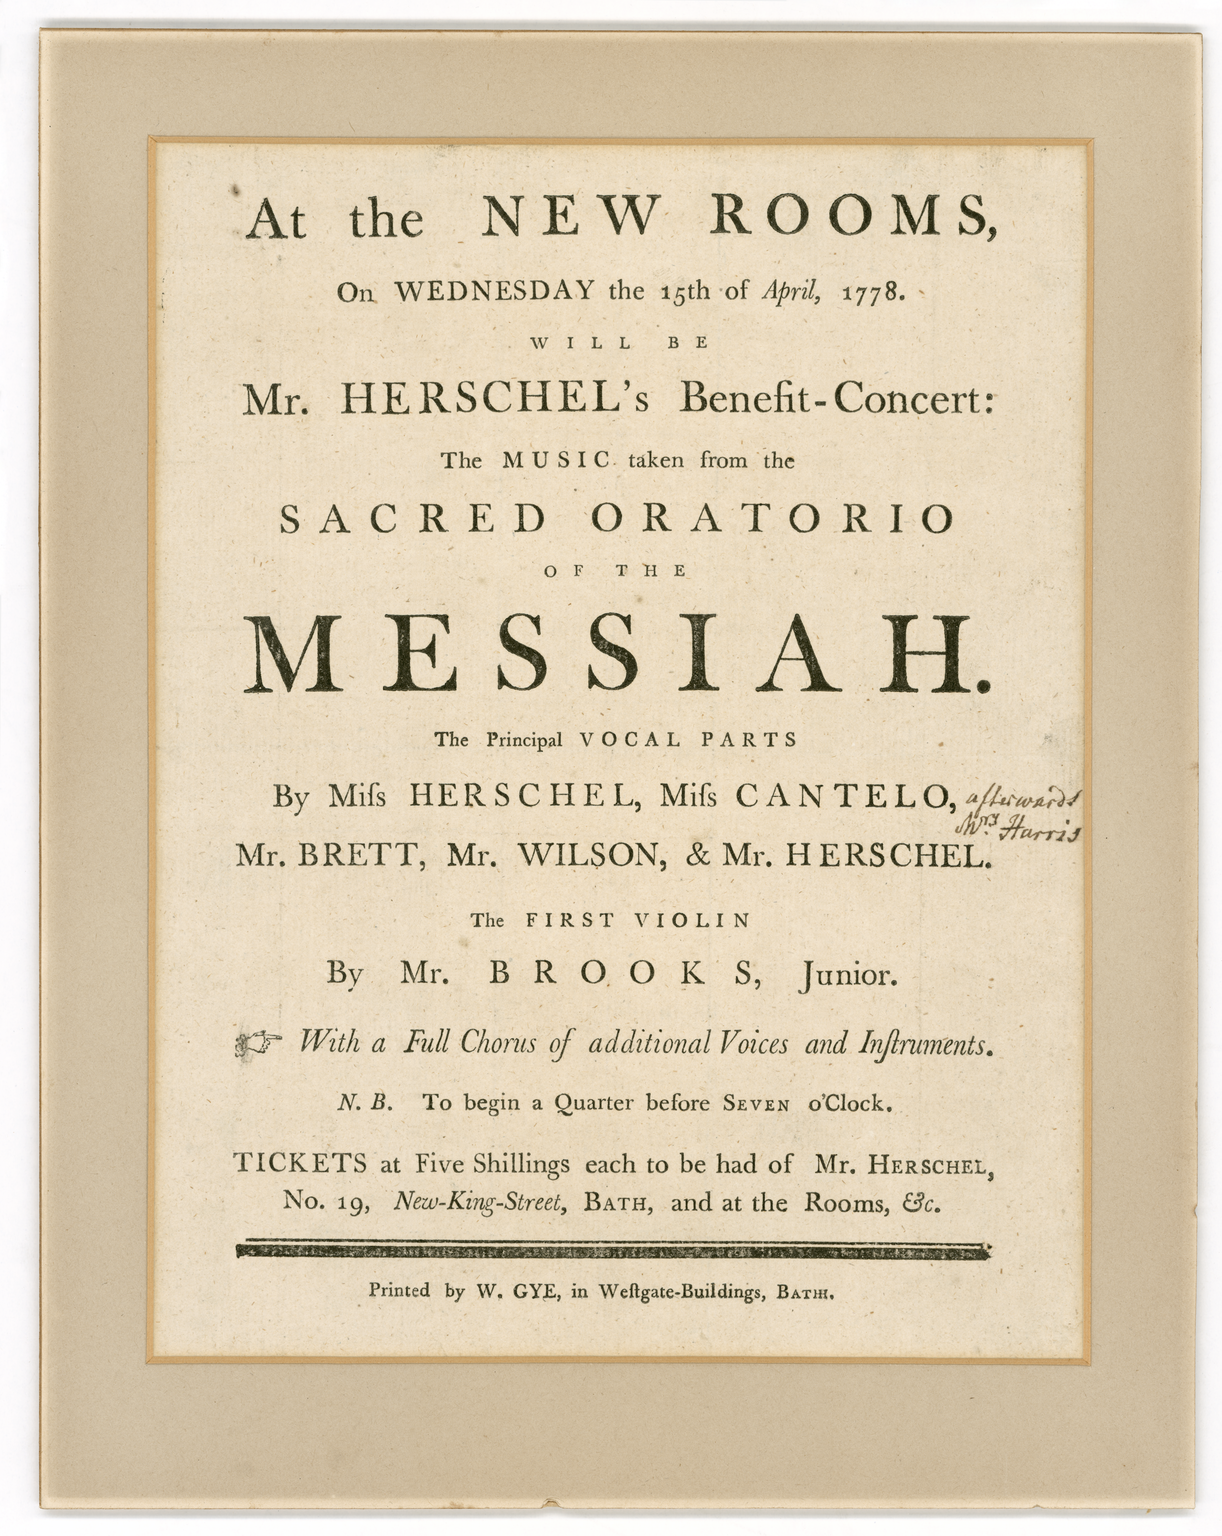 Caroline sang at this performance of Handel's Messiah conducted by William. (Science Museum)